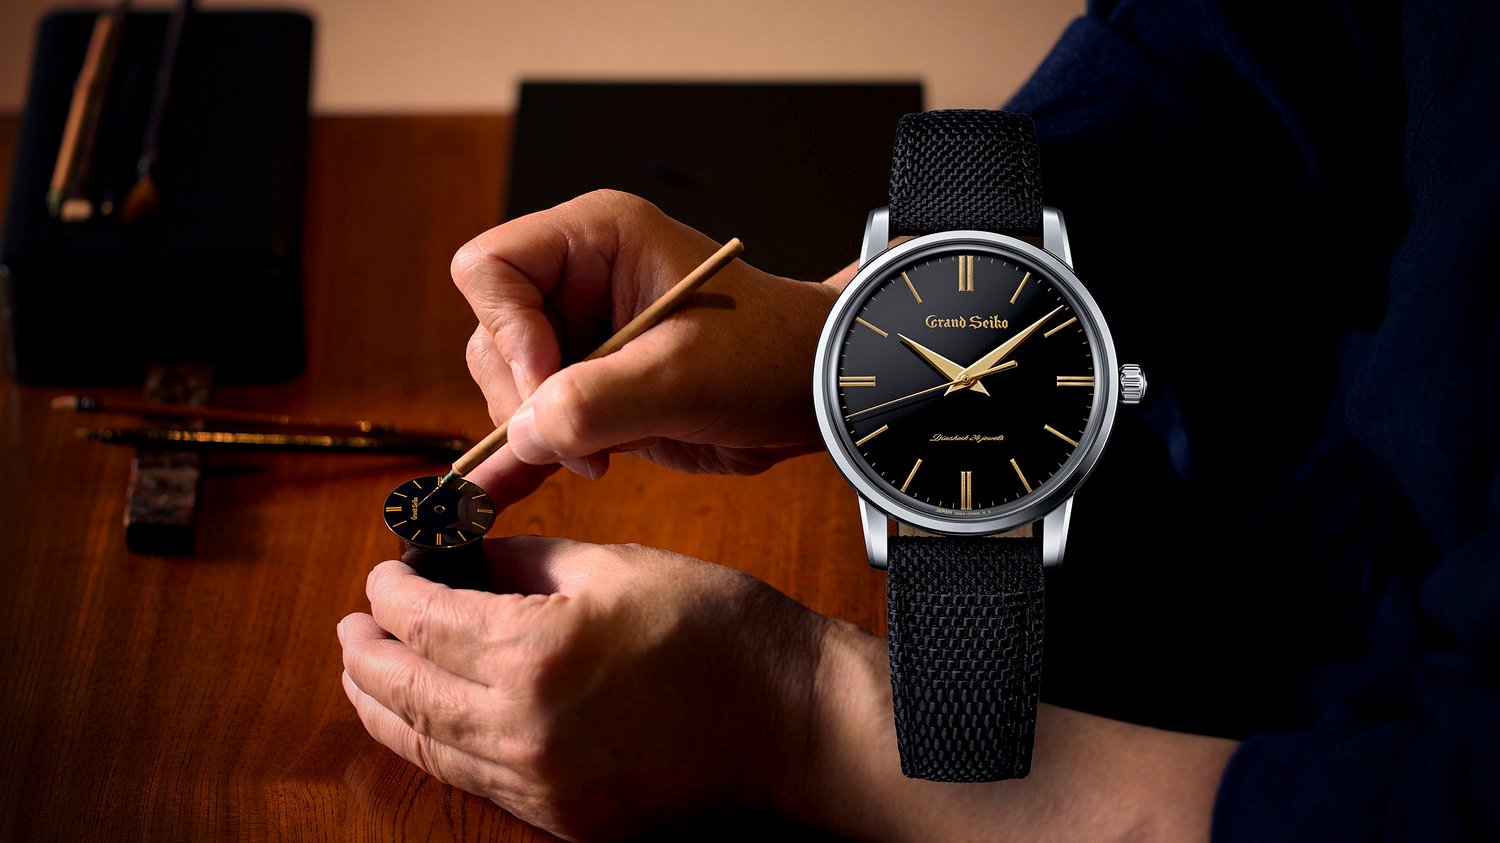 The Grand Seiko First Urushi features handpainted gold on an urushi dial. Photo: Handout